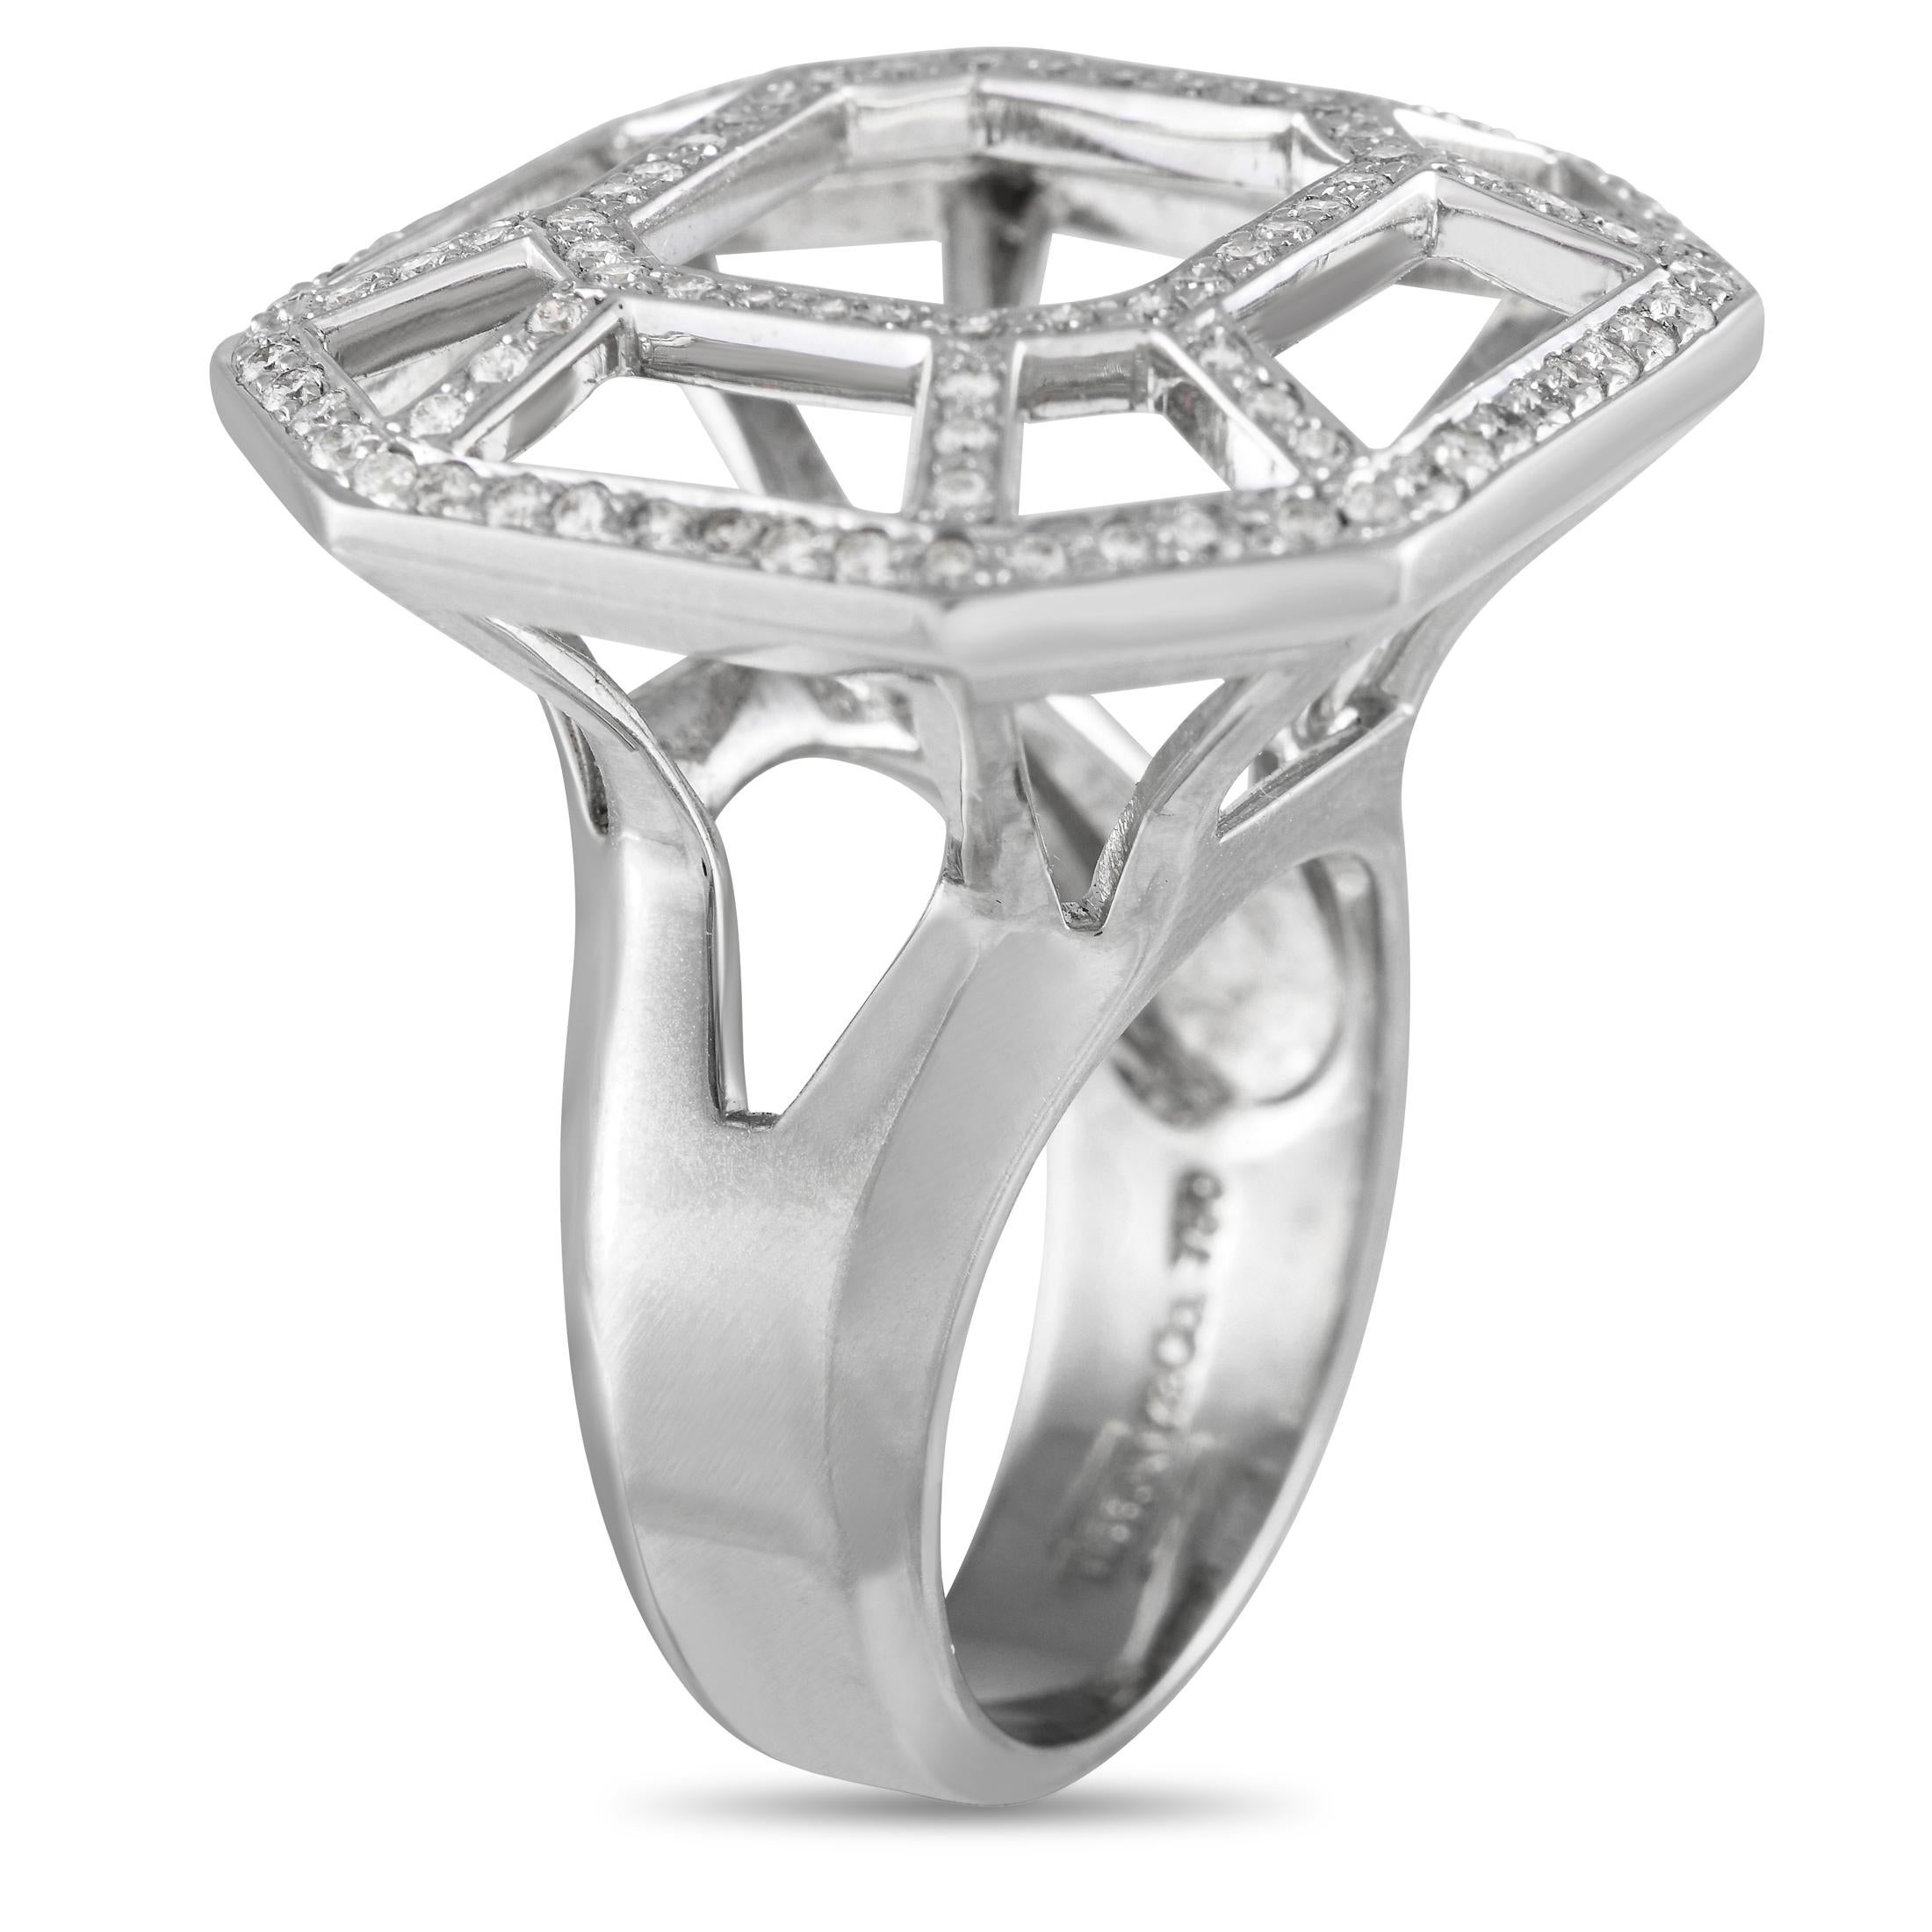 An artful creation by Paloma Piccaso for Tiffany & Co., this 18K white gold ring showcases the French fashion designer's love for geometric forms. The ring features a 6mm-thick band with split shoulders that lead to an octagonal open frame outlined